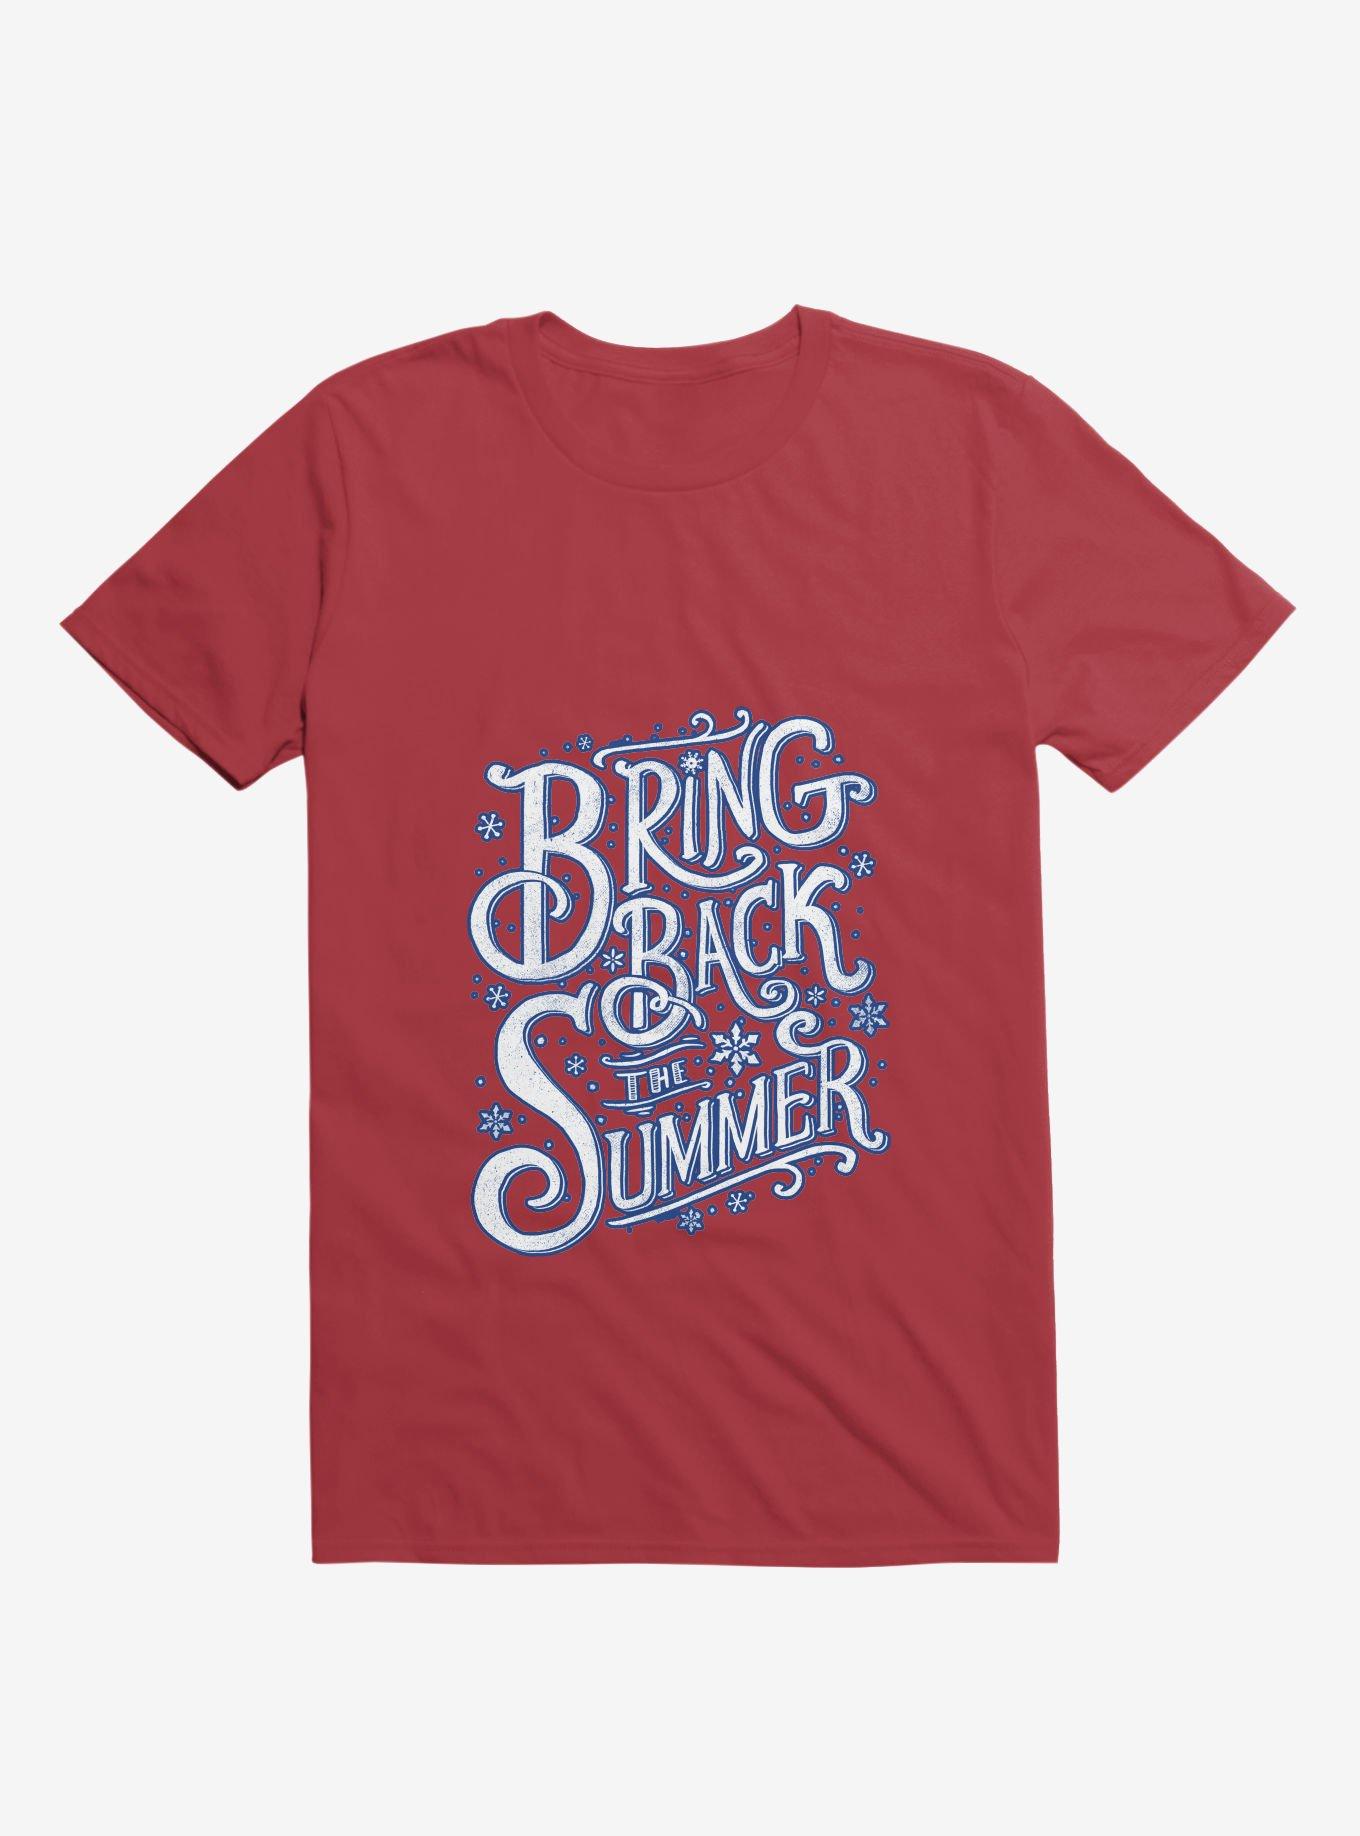 Bring Back The Summer Red T-Shirt